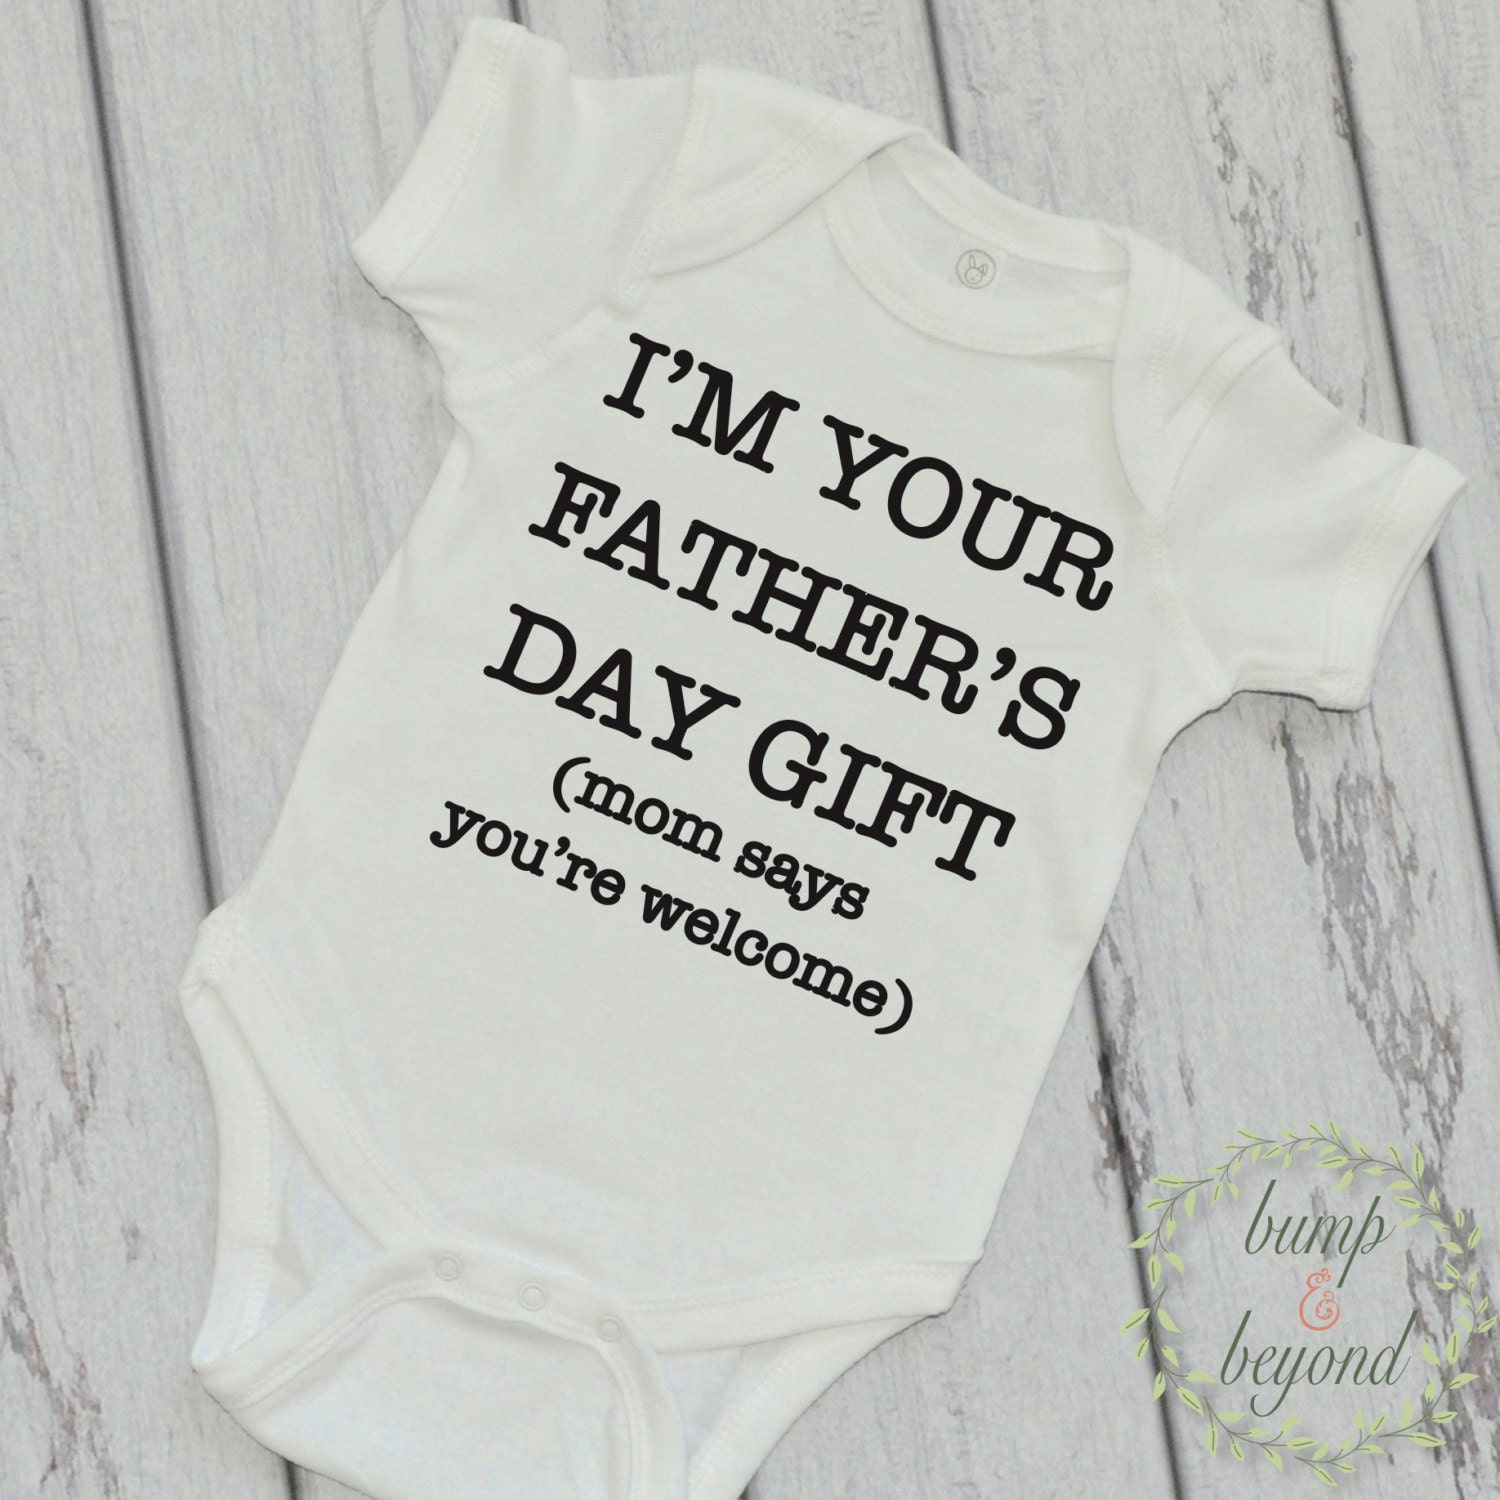 Download I'm Your Father's Day Gift Mom Says You're Welcome